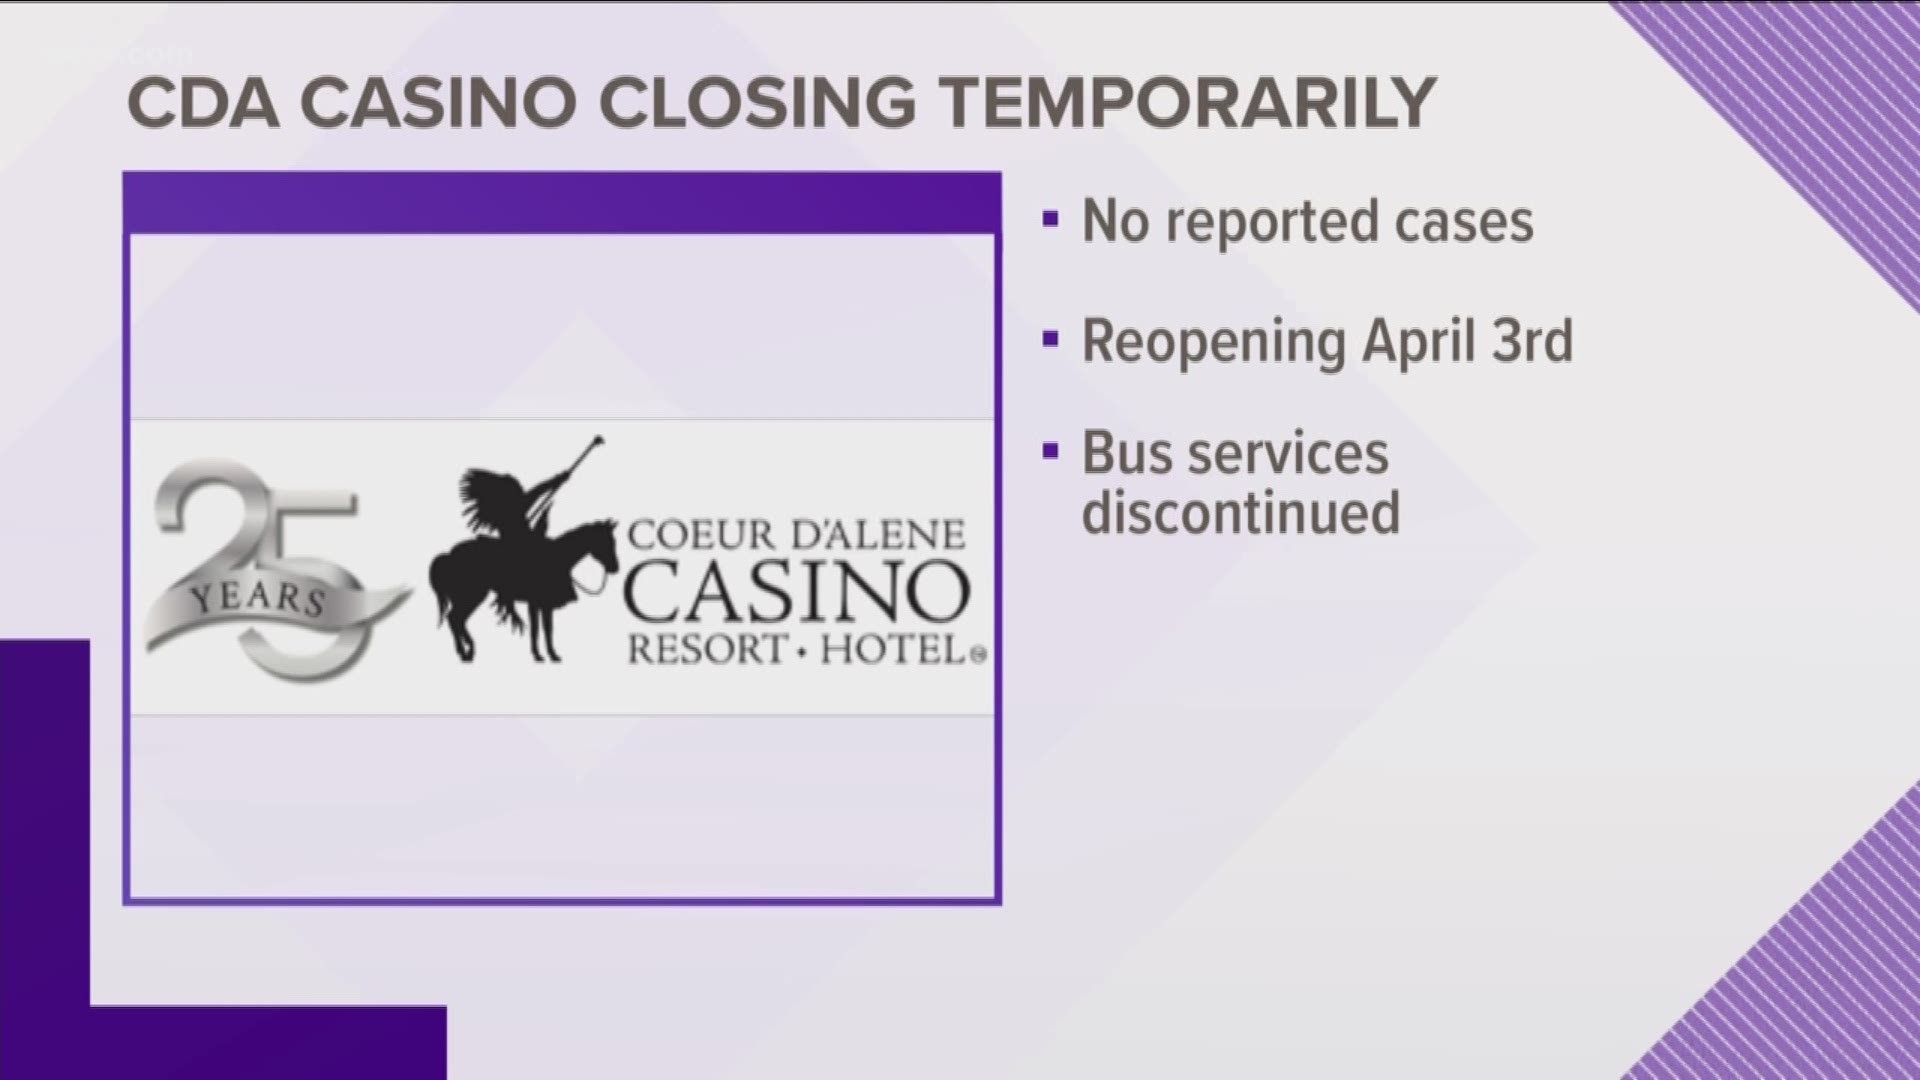 The Coeur d'Alene Casino  Resort Hotel announced Thursday it would be closing for 14 days starting on Friday at noon.